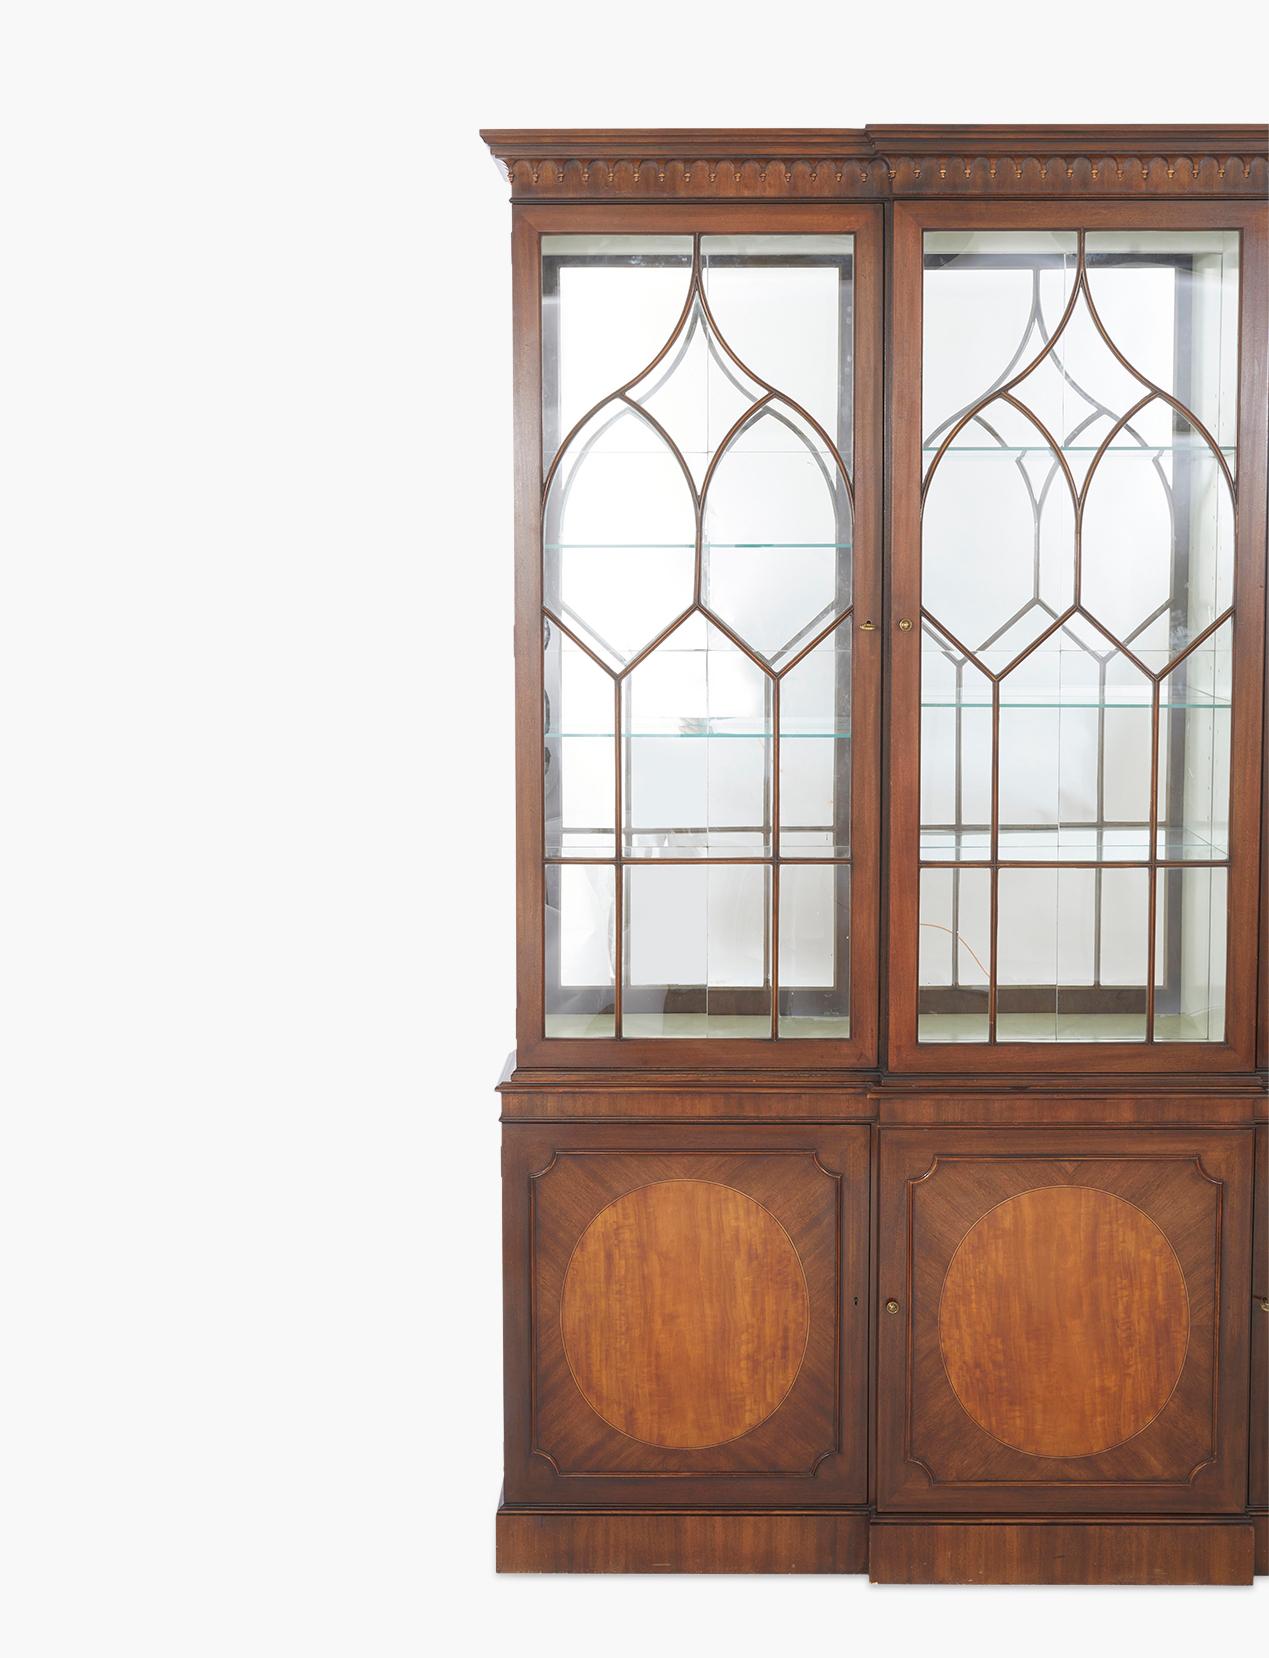 Beautifully hand crafted two part inlaid mahogany wood North American breakfront china cabinet / hutch. The upper part interior featuring white paint wall with glass shelves and mirrored back splash with three doors & locking keys. The breakfront is